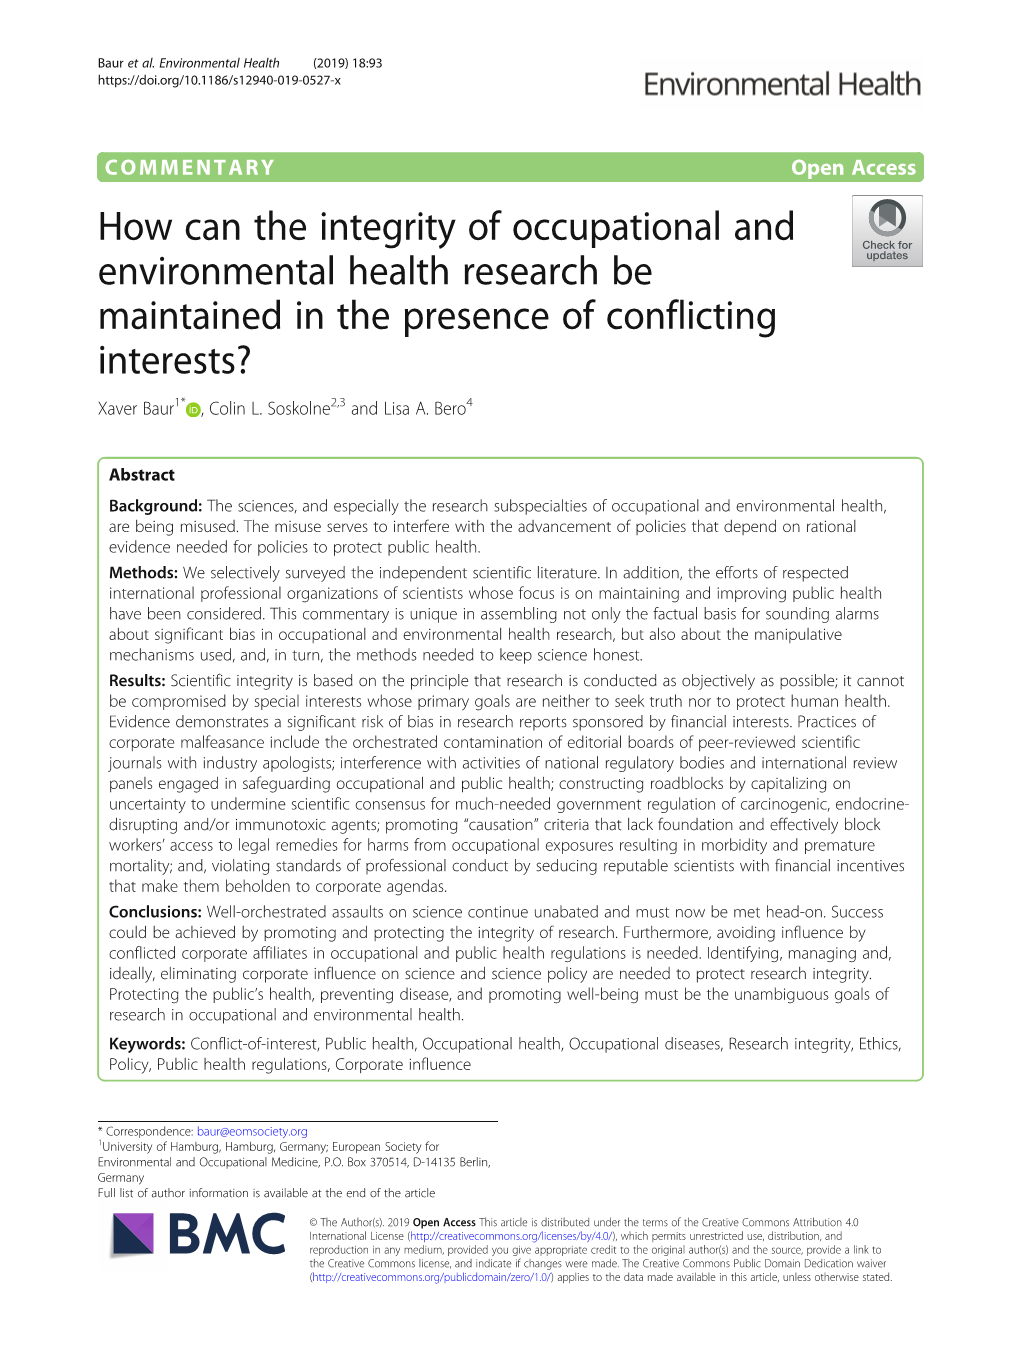 How Can the Integrity of Occupational and Environmental Health Research Be Maintained in the Presence of Conflicting Interests? Xaver Baur1* , Colin L